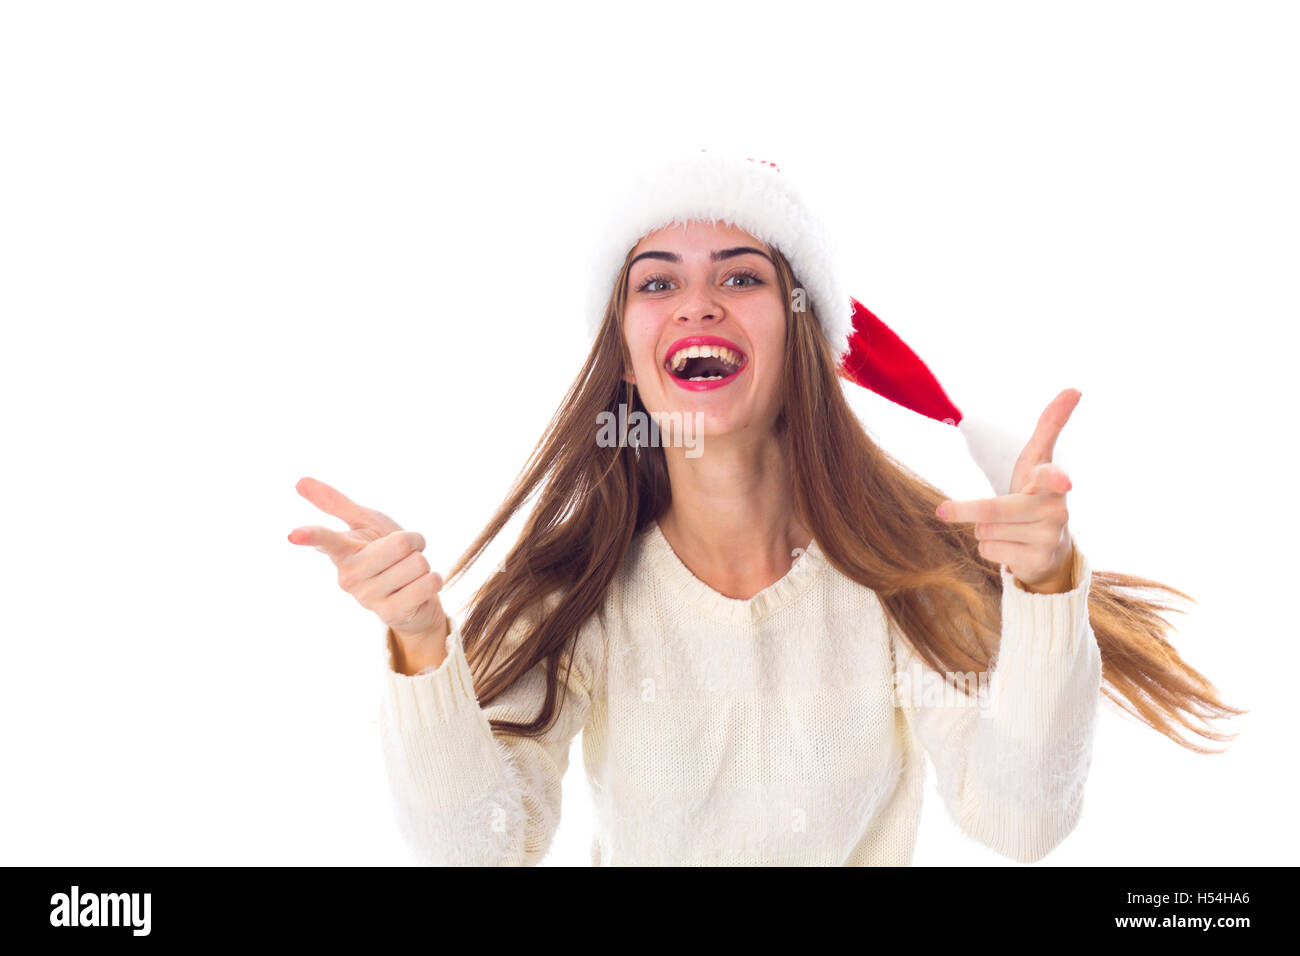 Woman in red christmas hat Banque D'Images